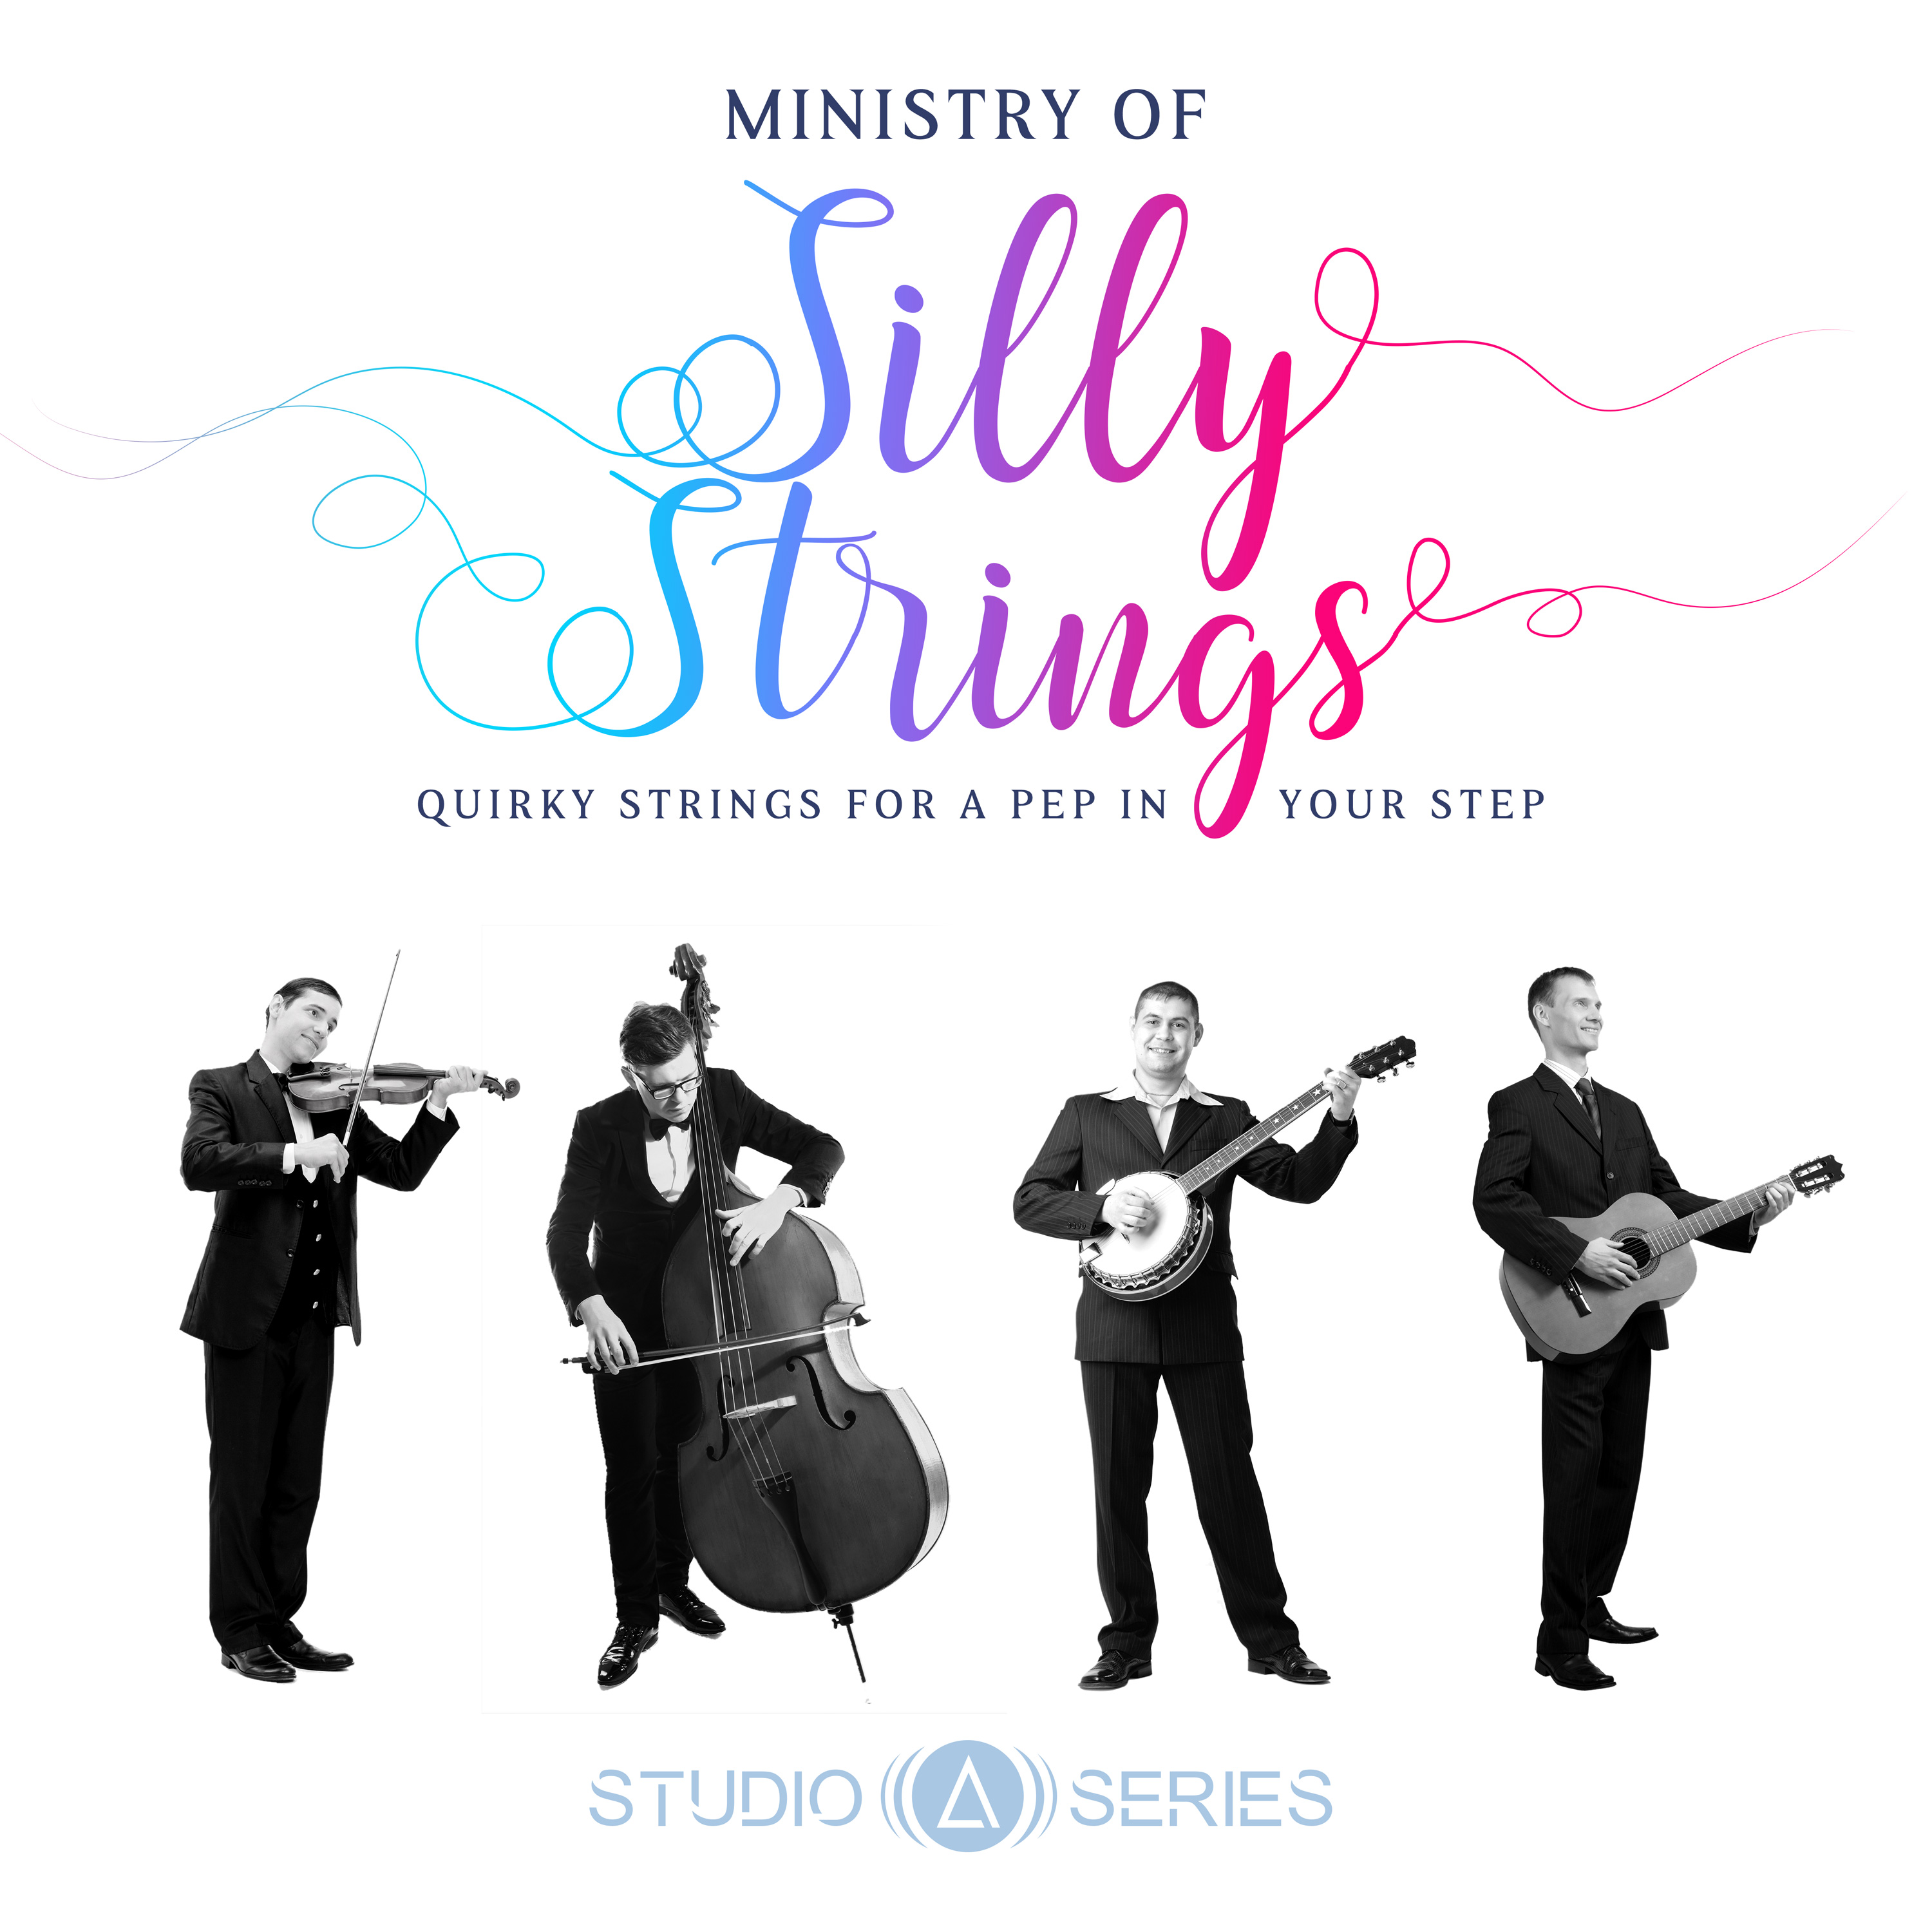 Ministry of Silly Strings